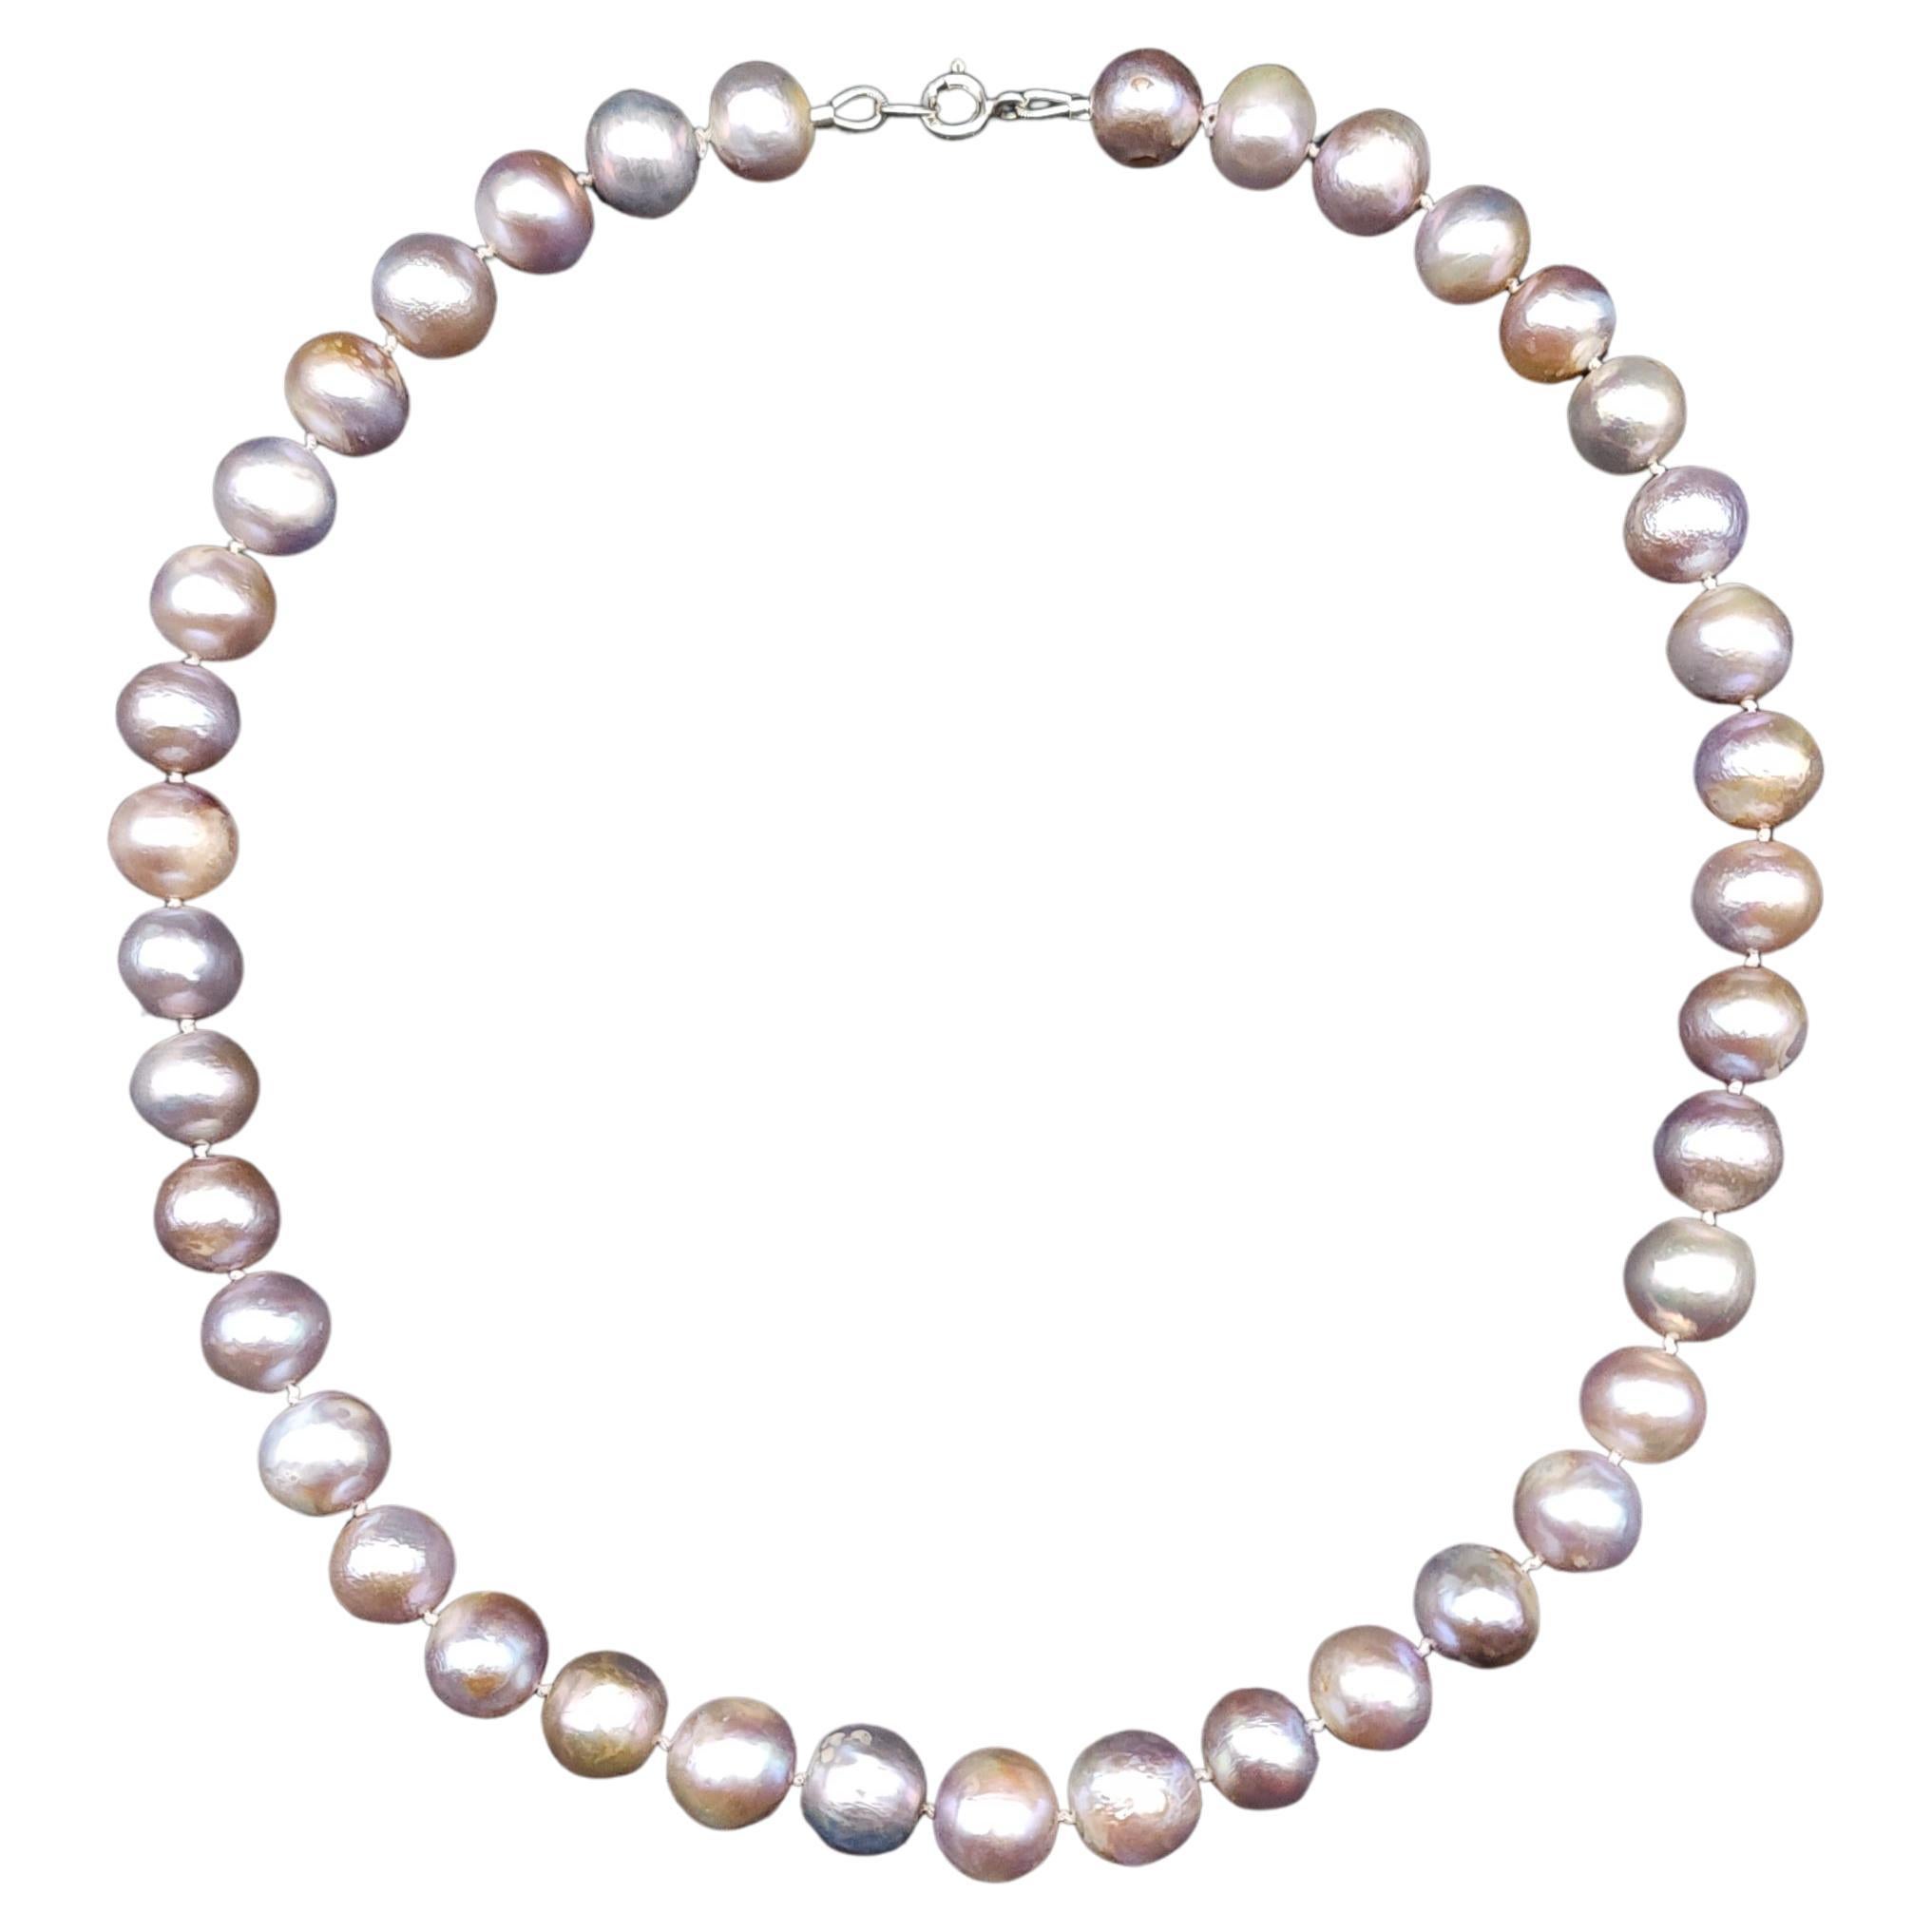 Do real pearls have a clasp?